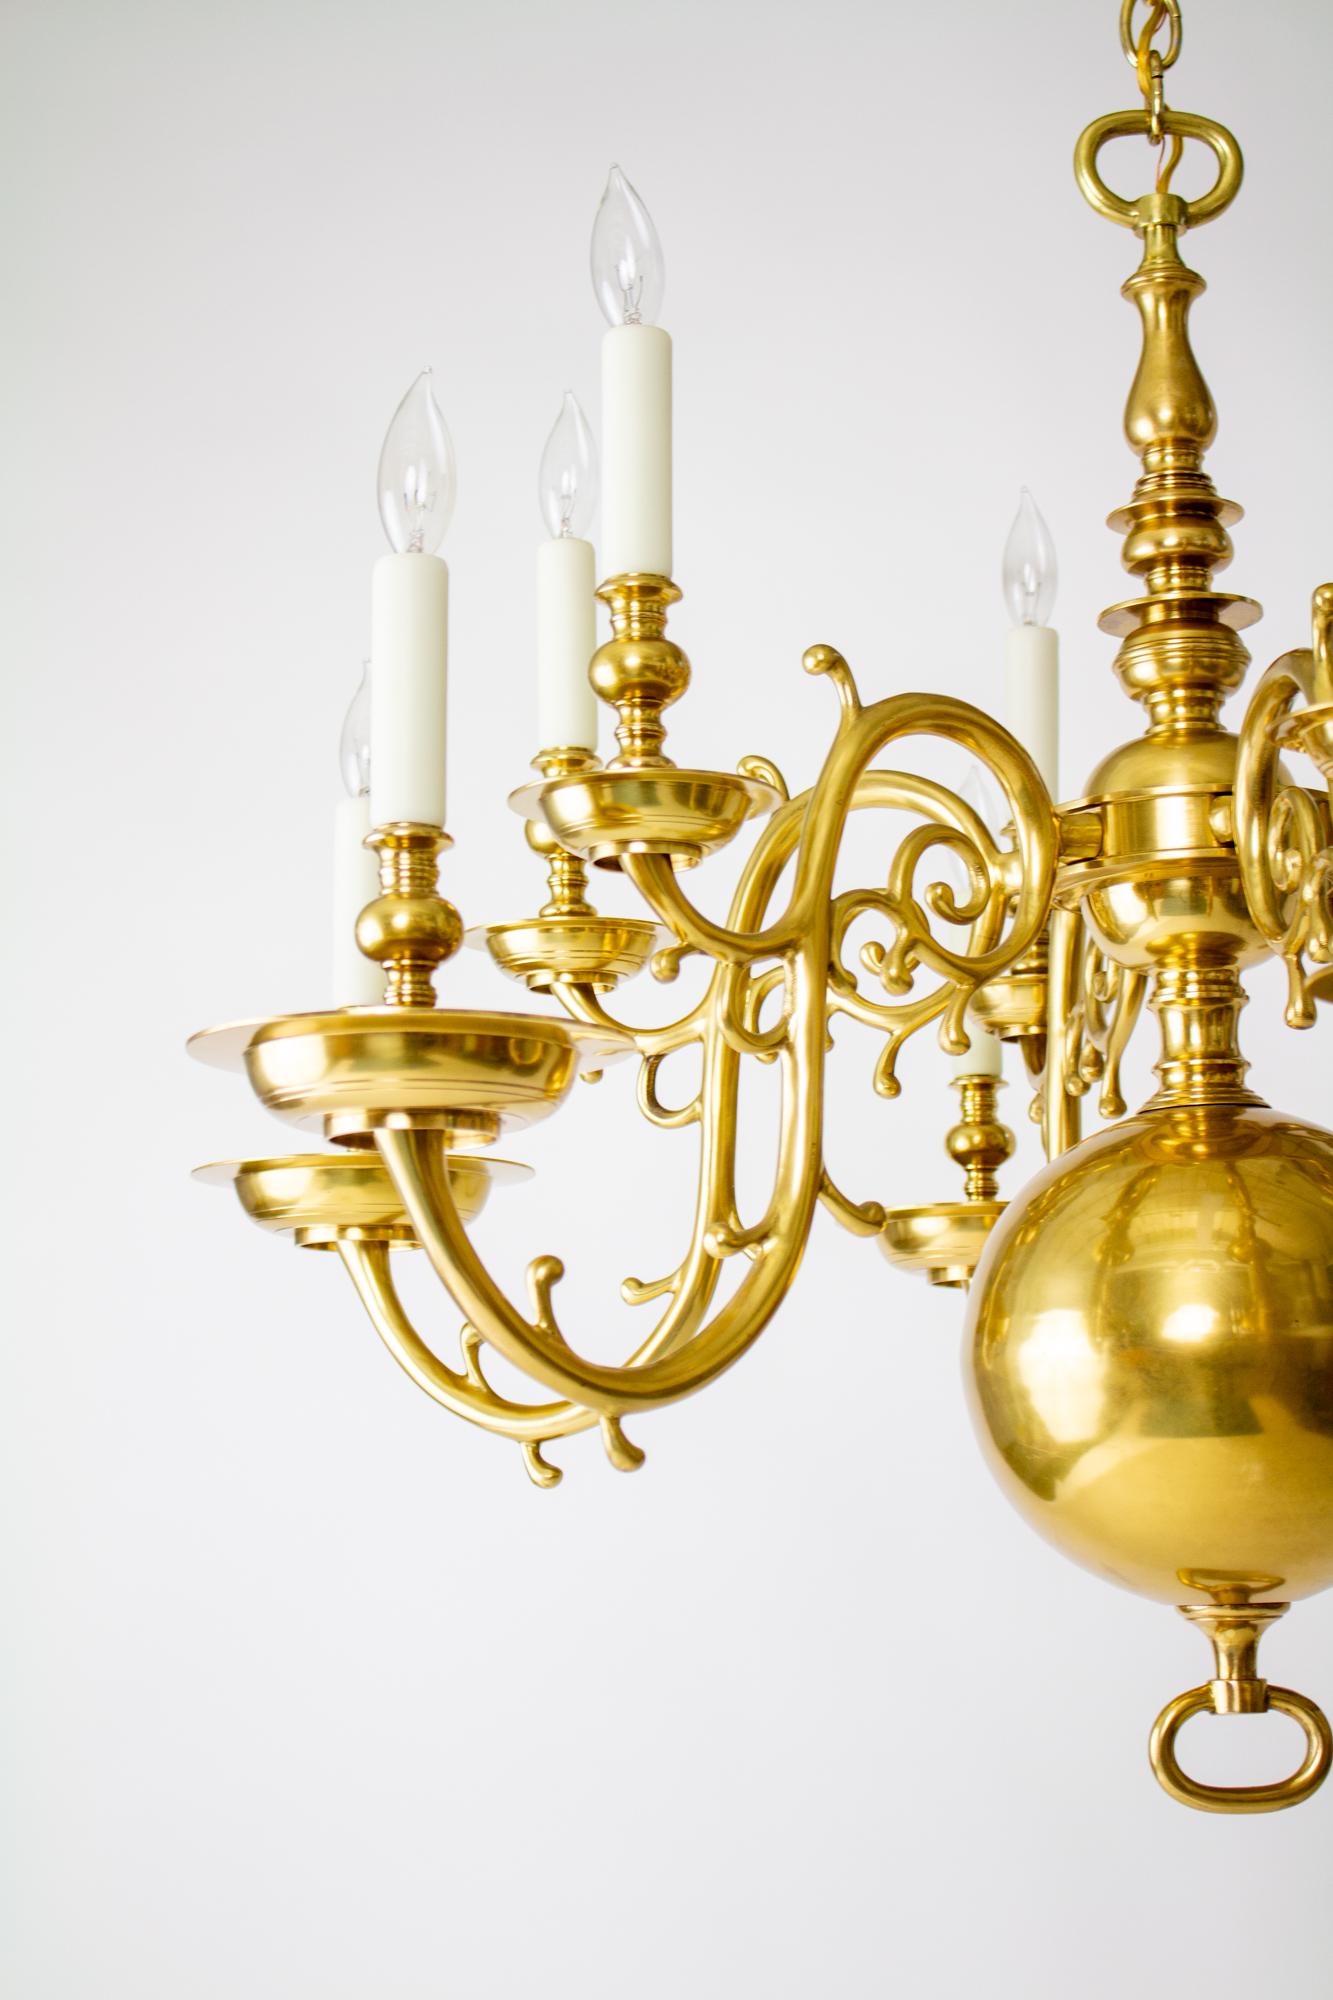 20th Century 12 Arm Dutch Colonial Brass Chandelier In Excellent Condition For Sale In Canton, MA